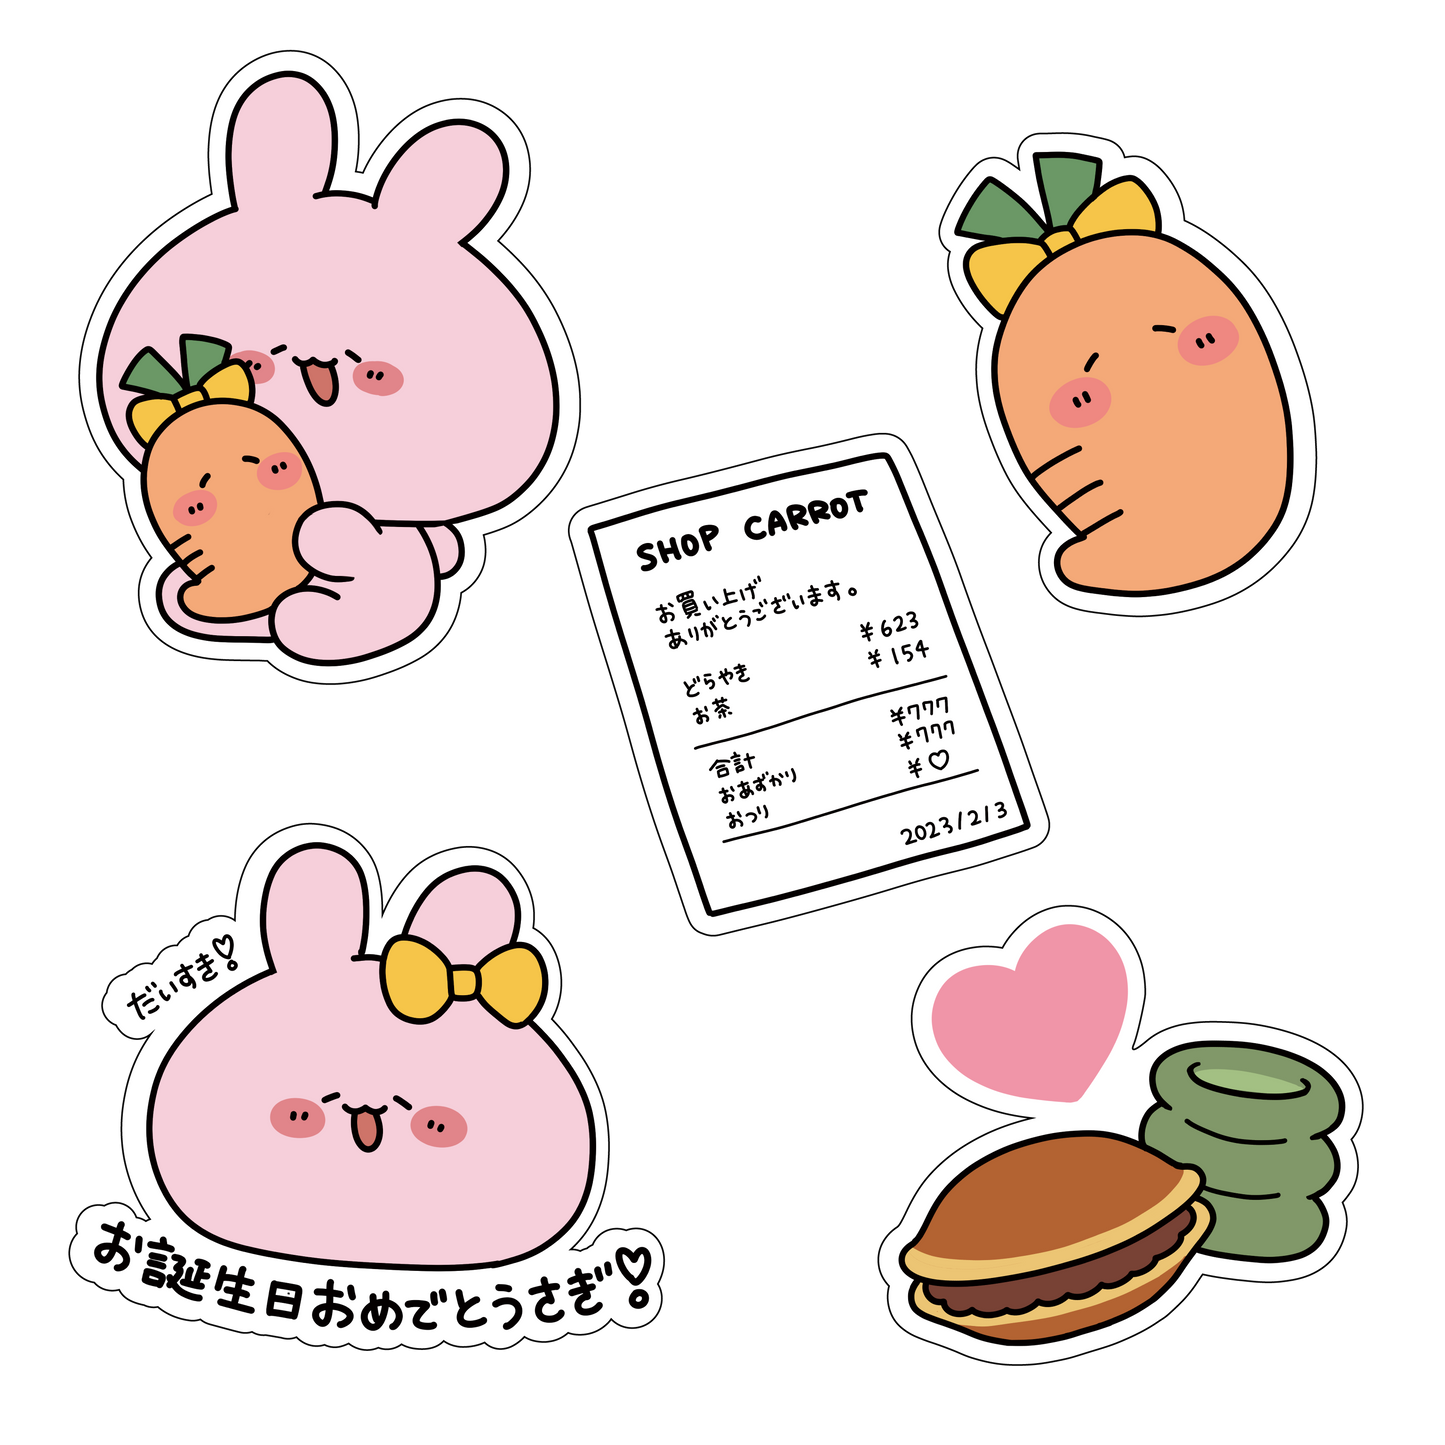 [Asamimi-chan] Carrot-chan birthday stickers (5 pieces) [shipped in early March]